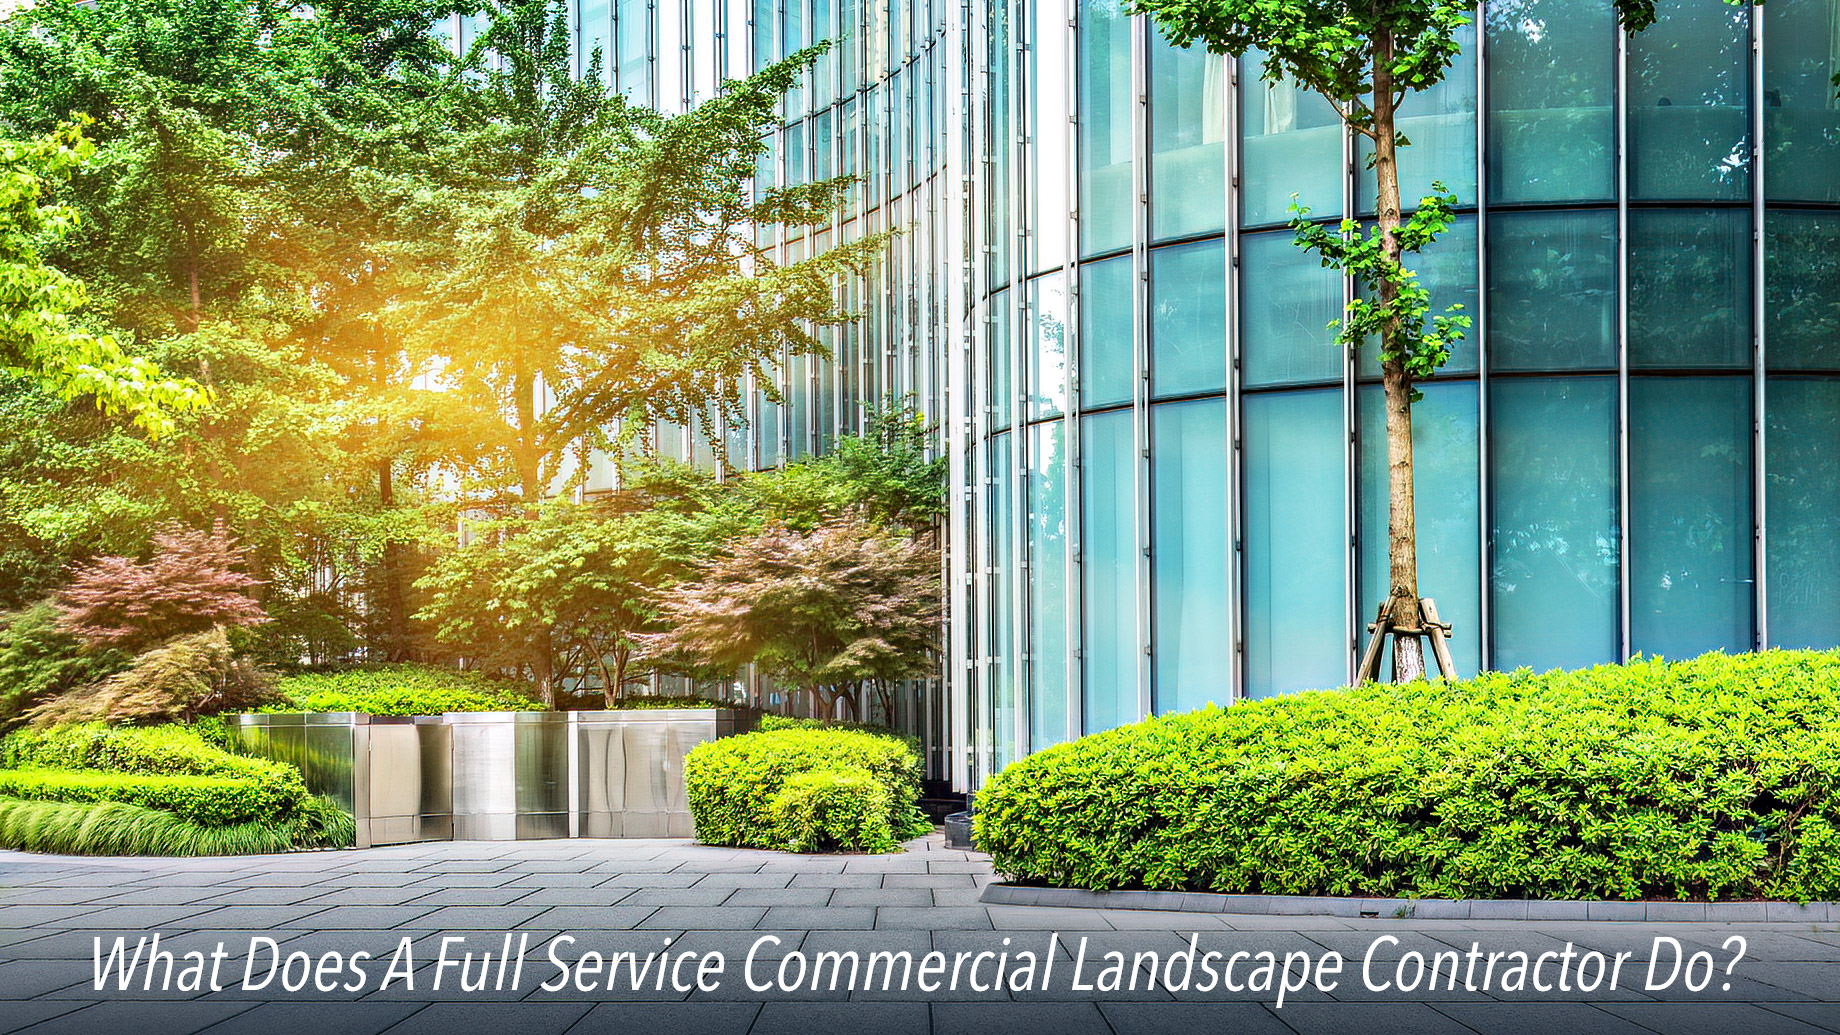 What Does A Full Service Commercial Landscape Contractor Do?